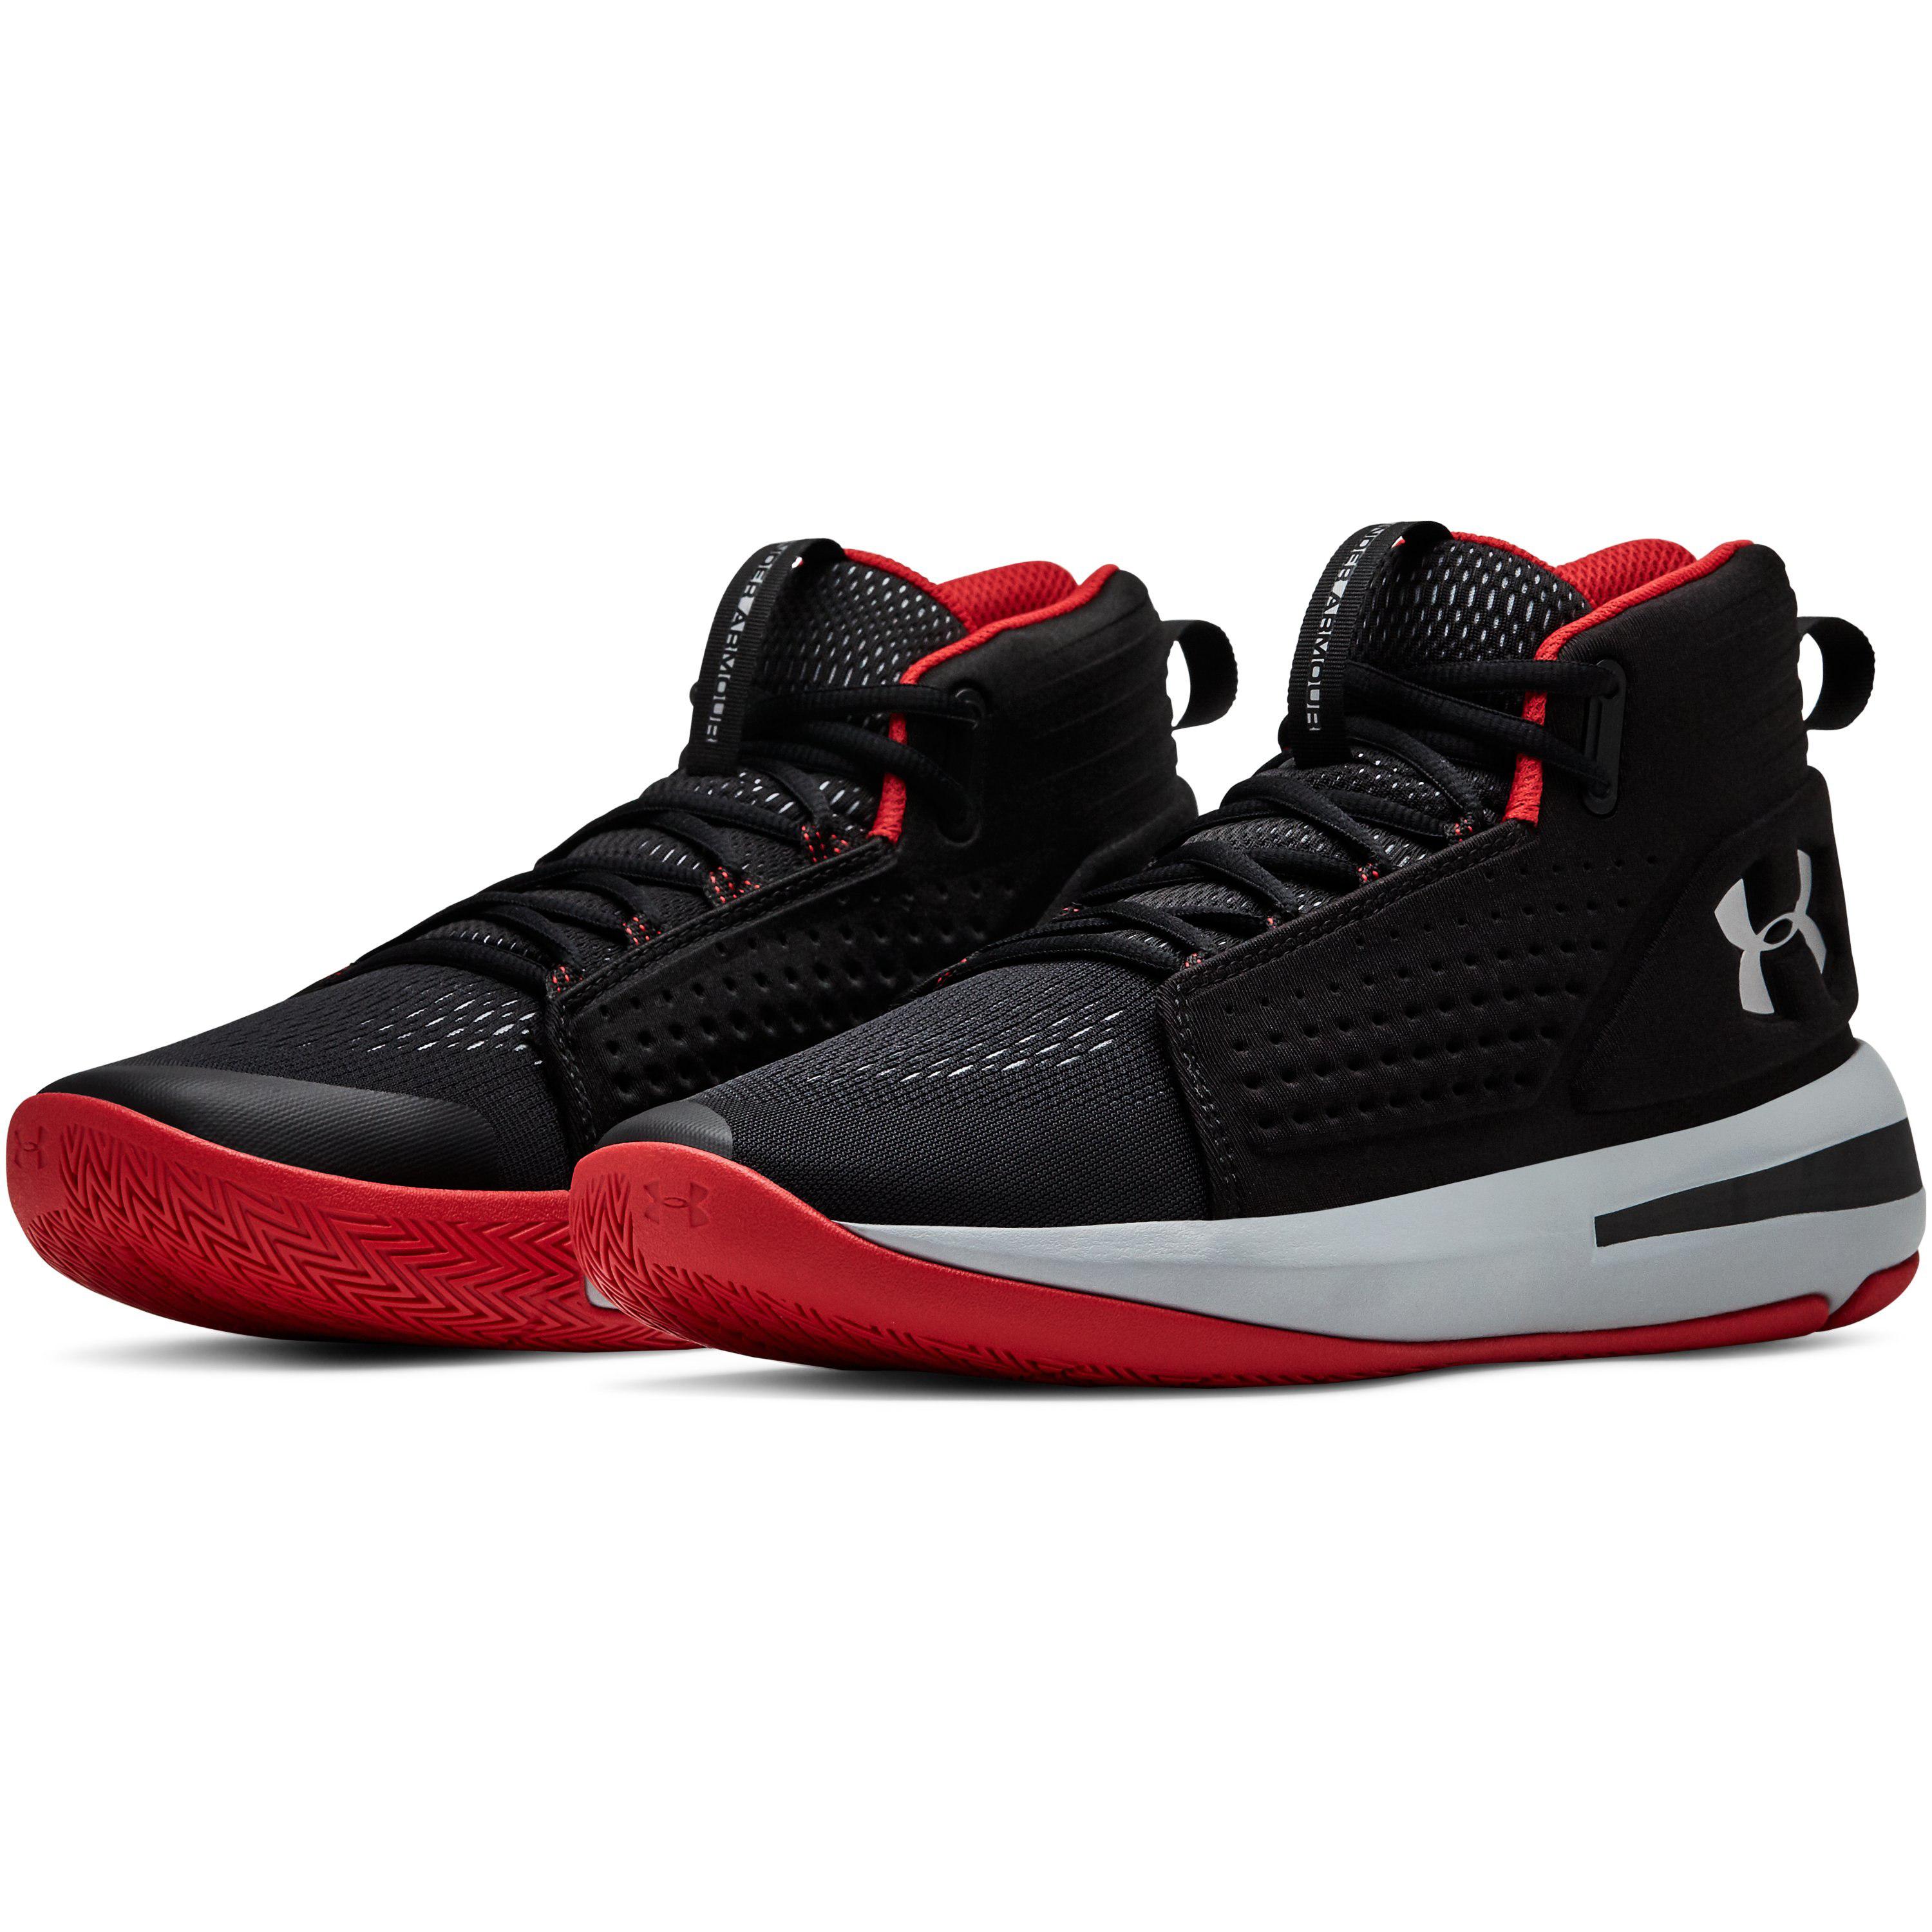 under armour torch mens basketball shoes